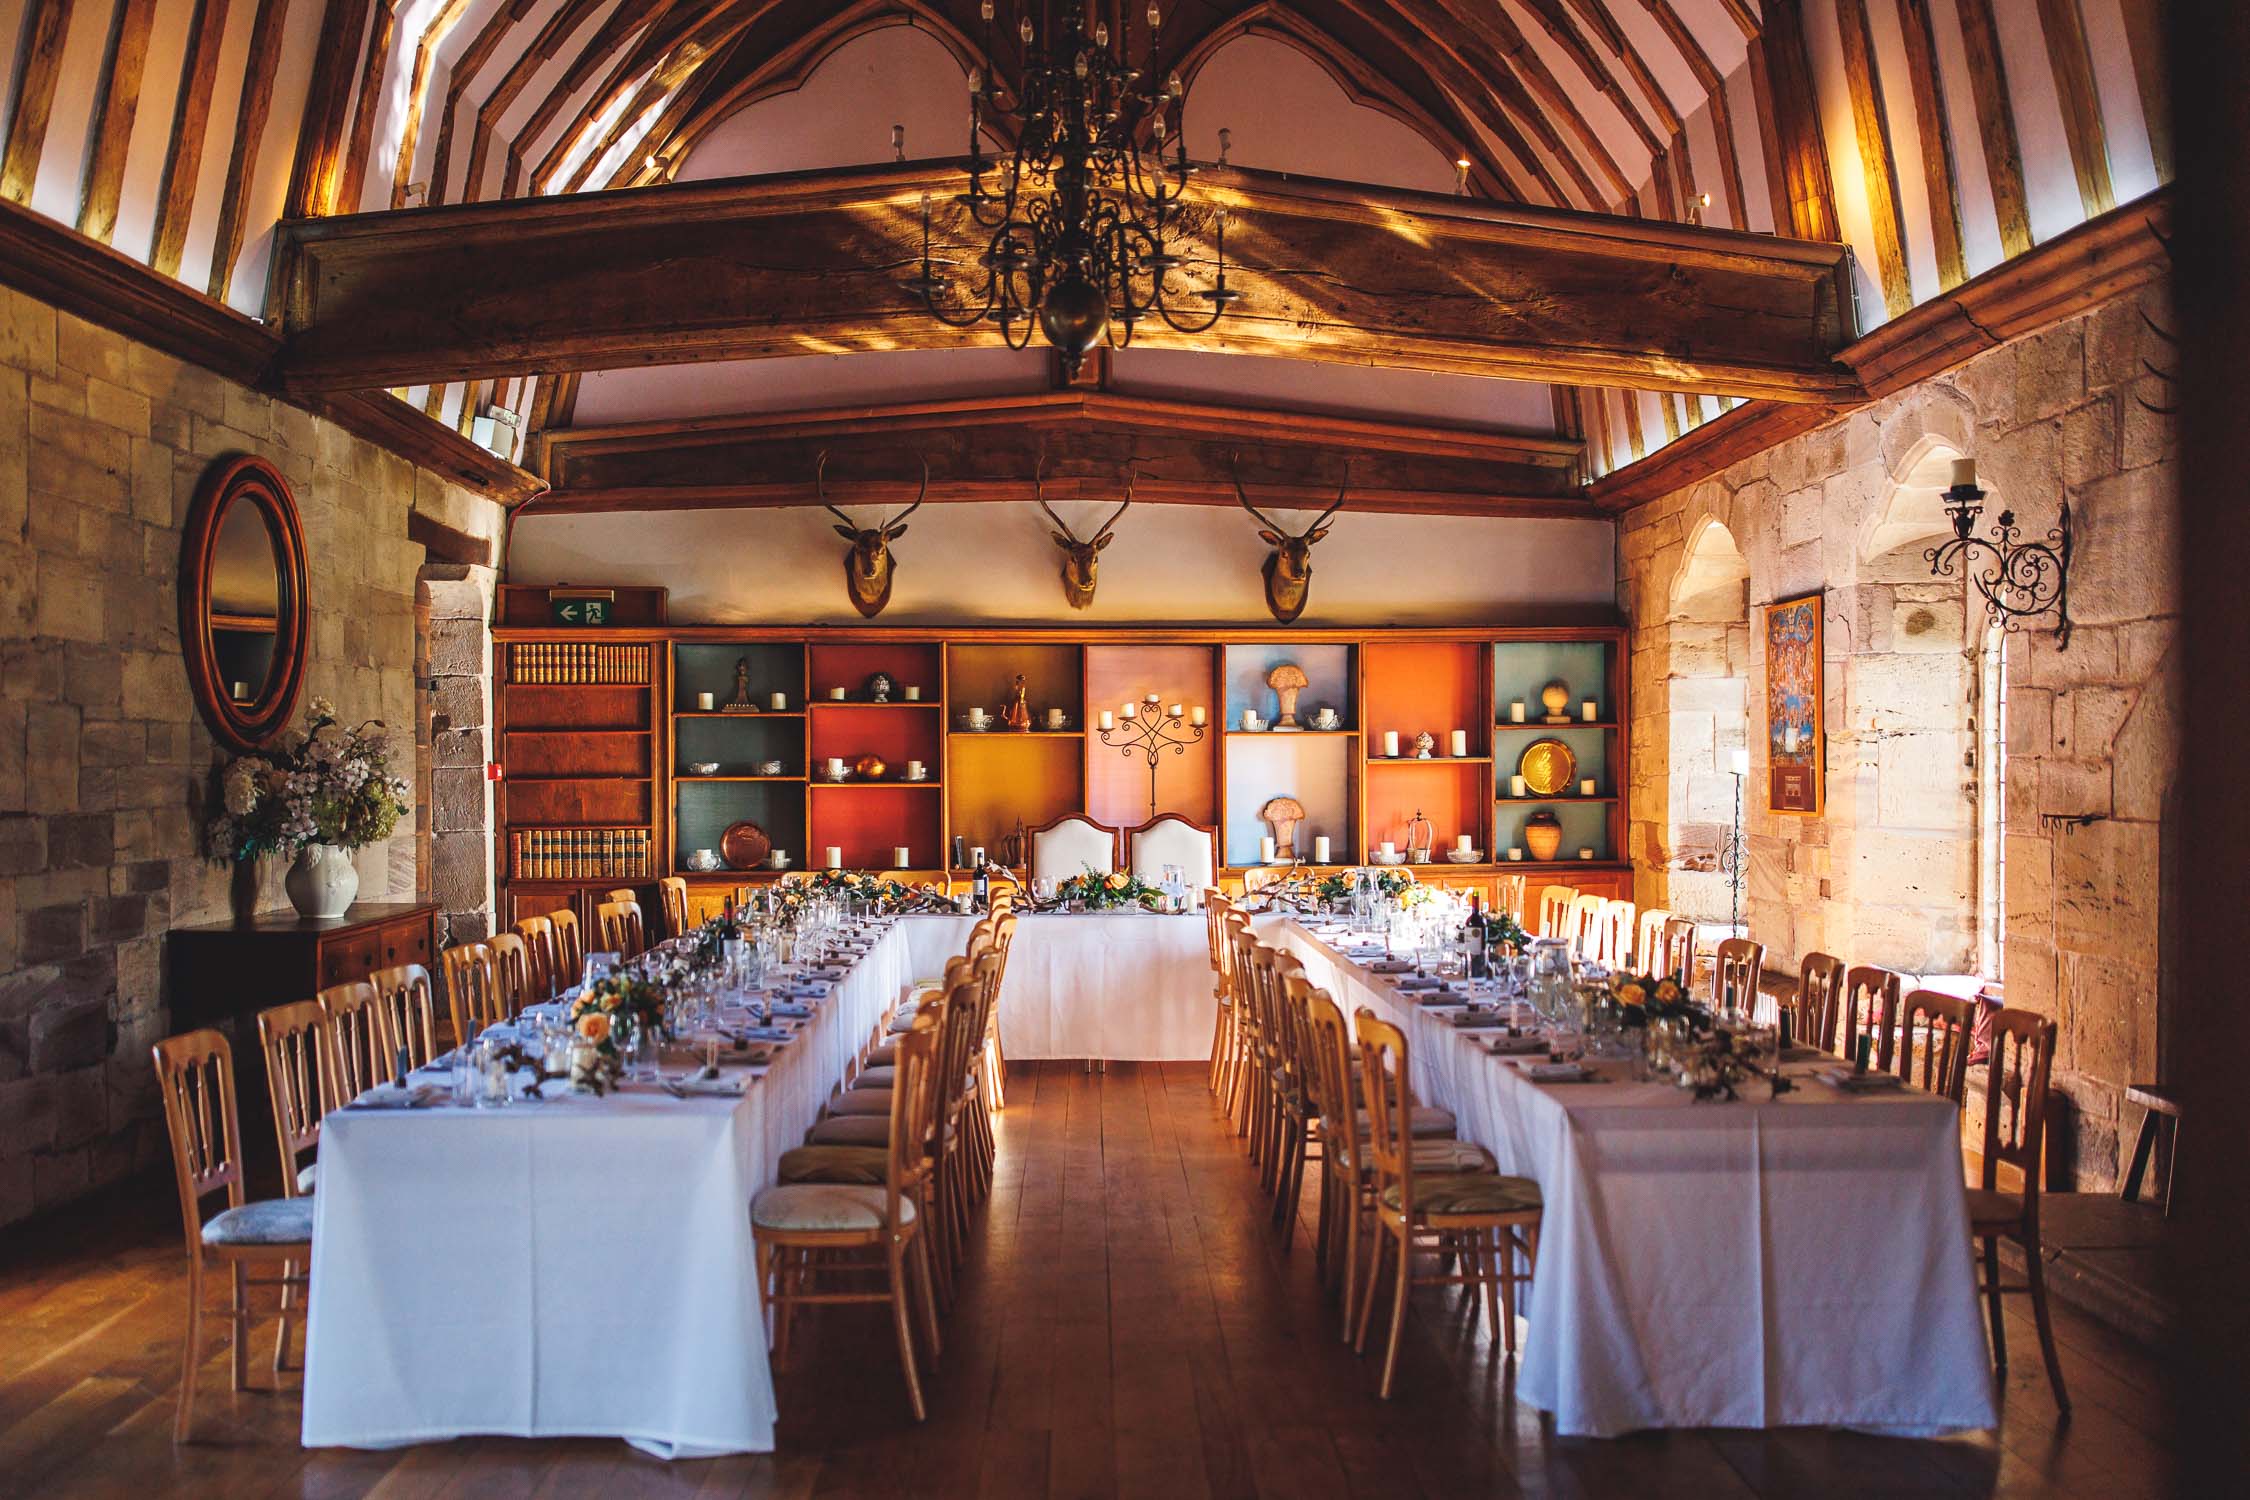 The Medieval Banqueting hall at Brinsop Court in Herefordshire